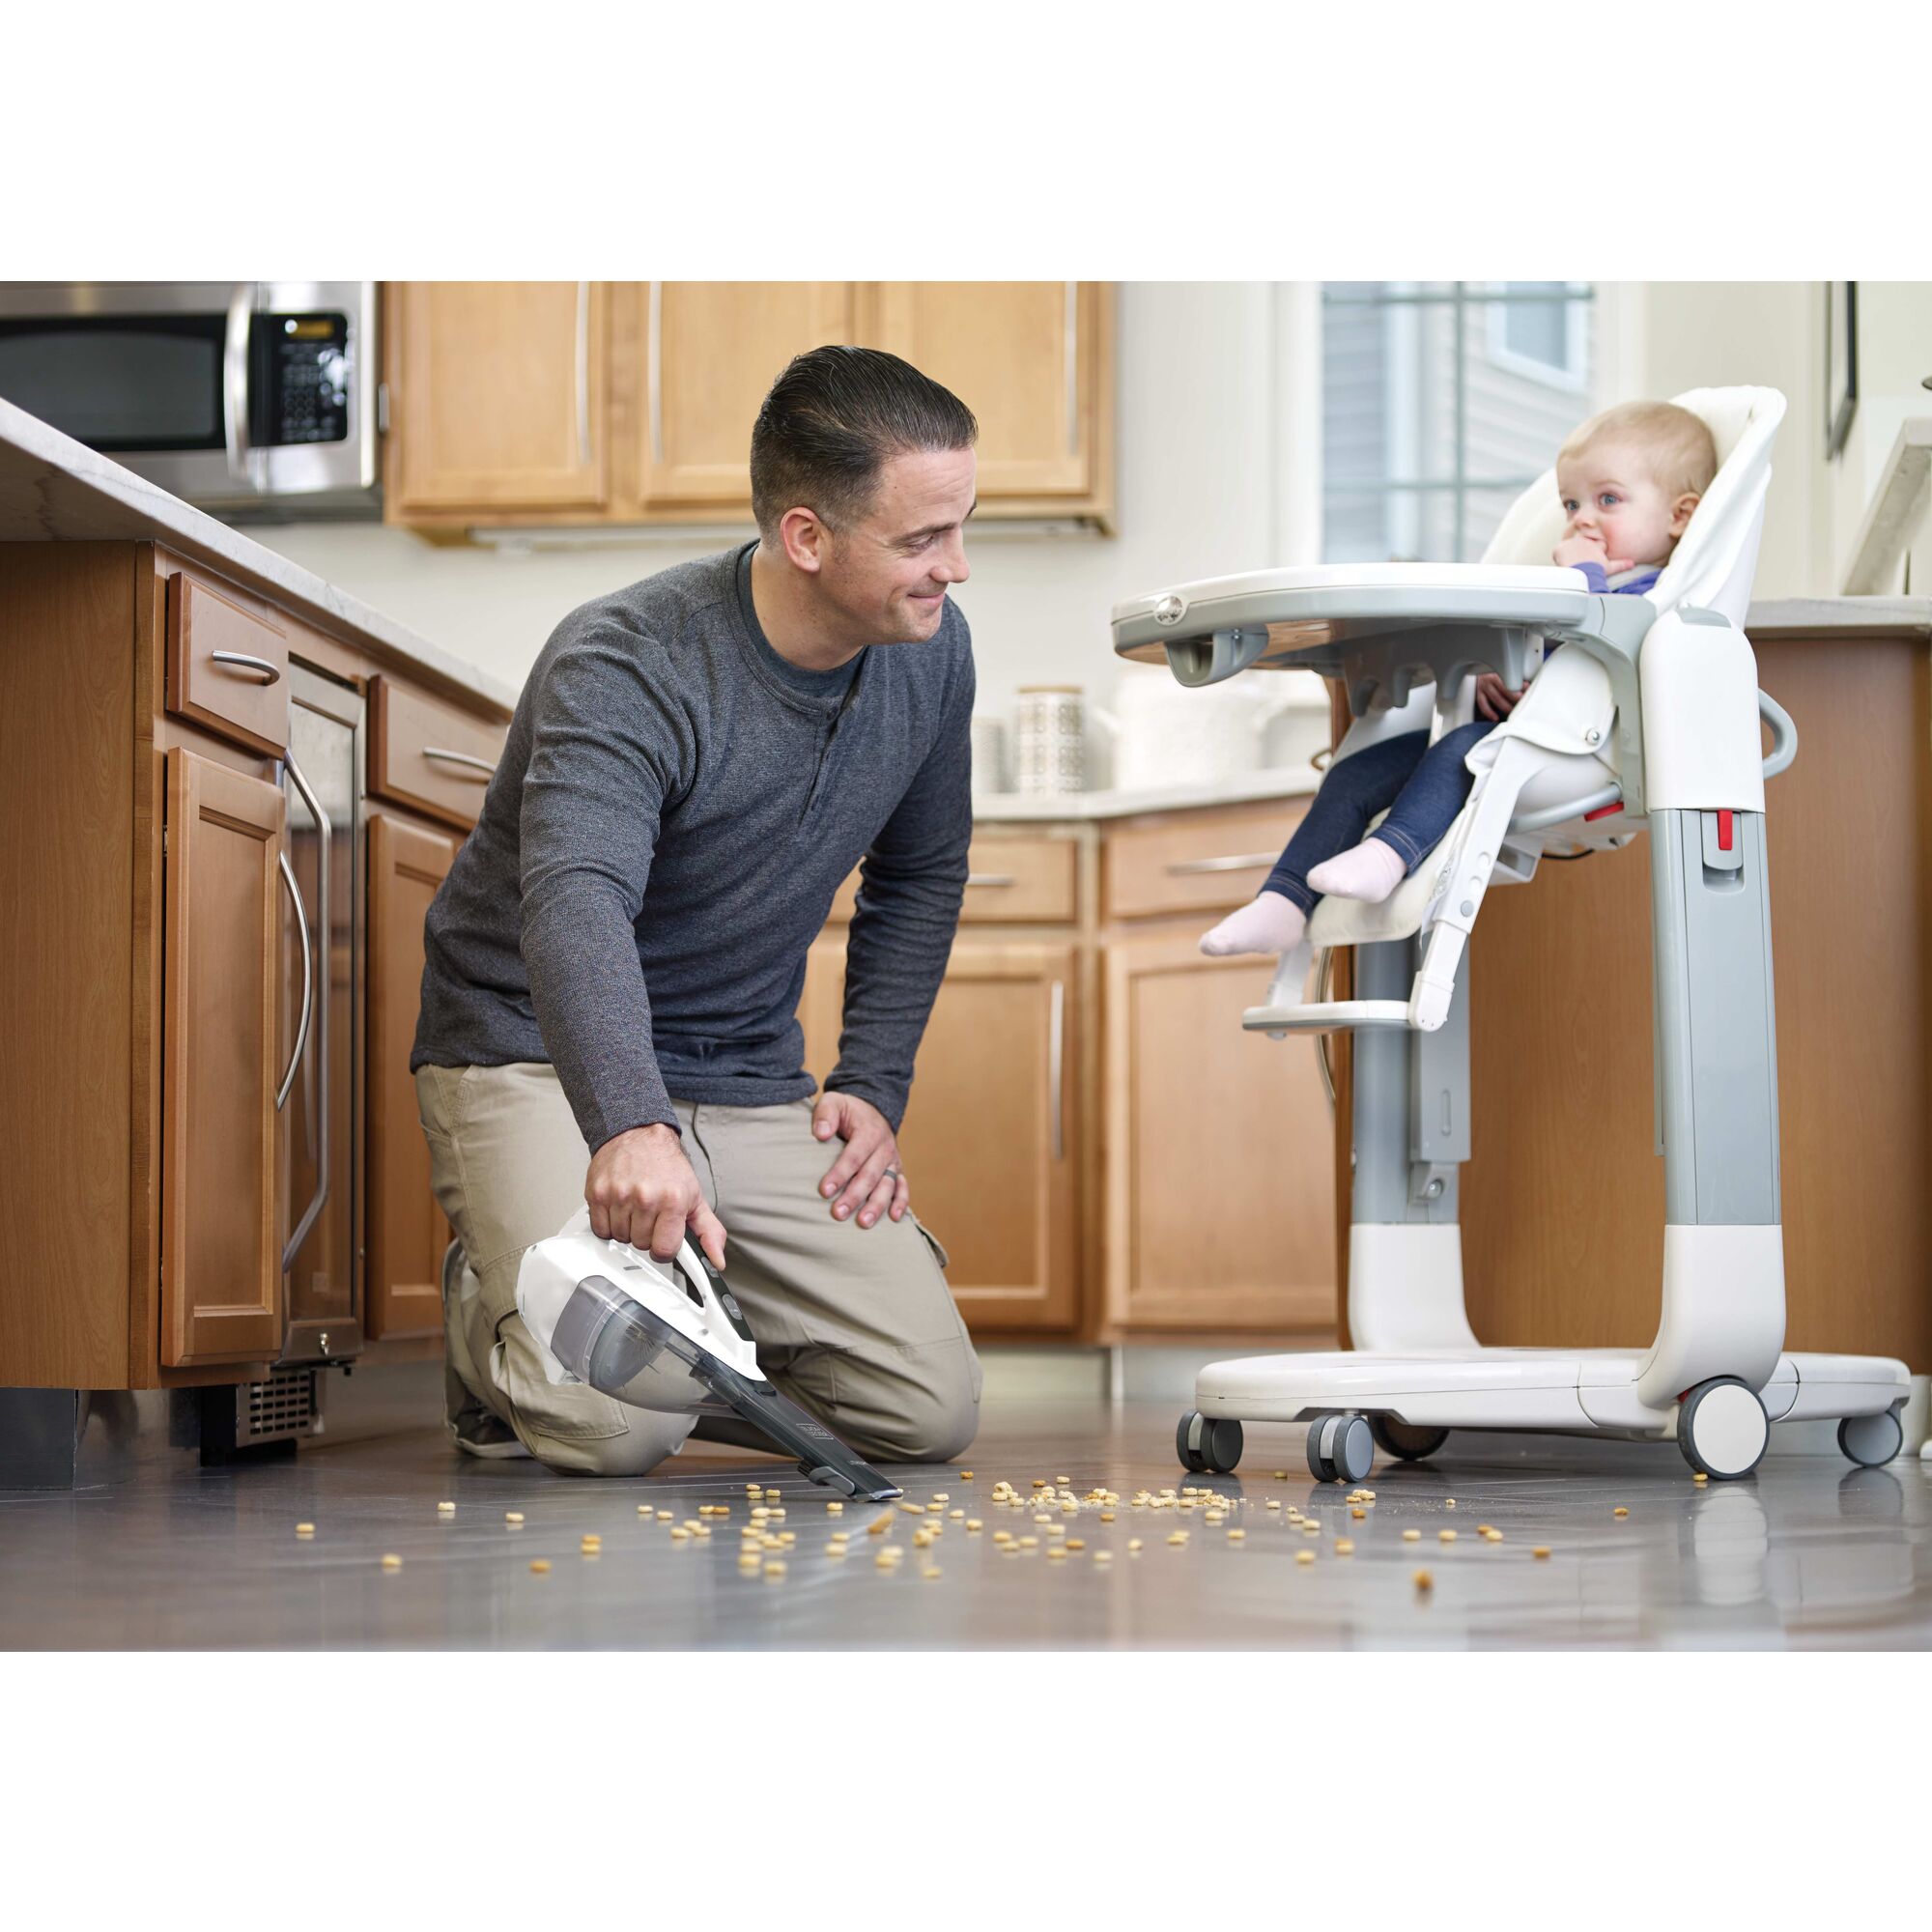 Dustbuster Advanced Clean Cordless Hand Vacuum being used for cleaning spilled bbaby food from floor.